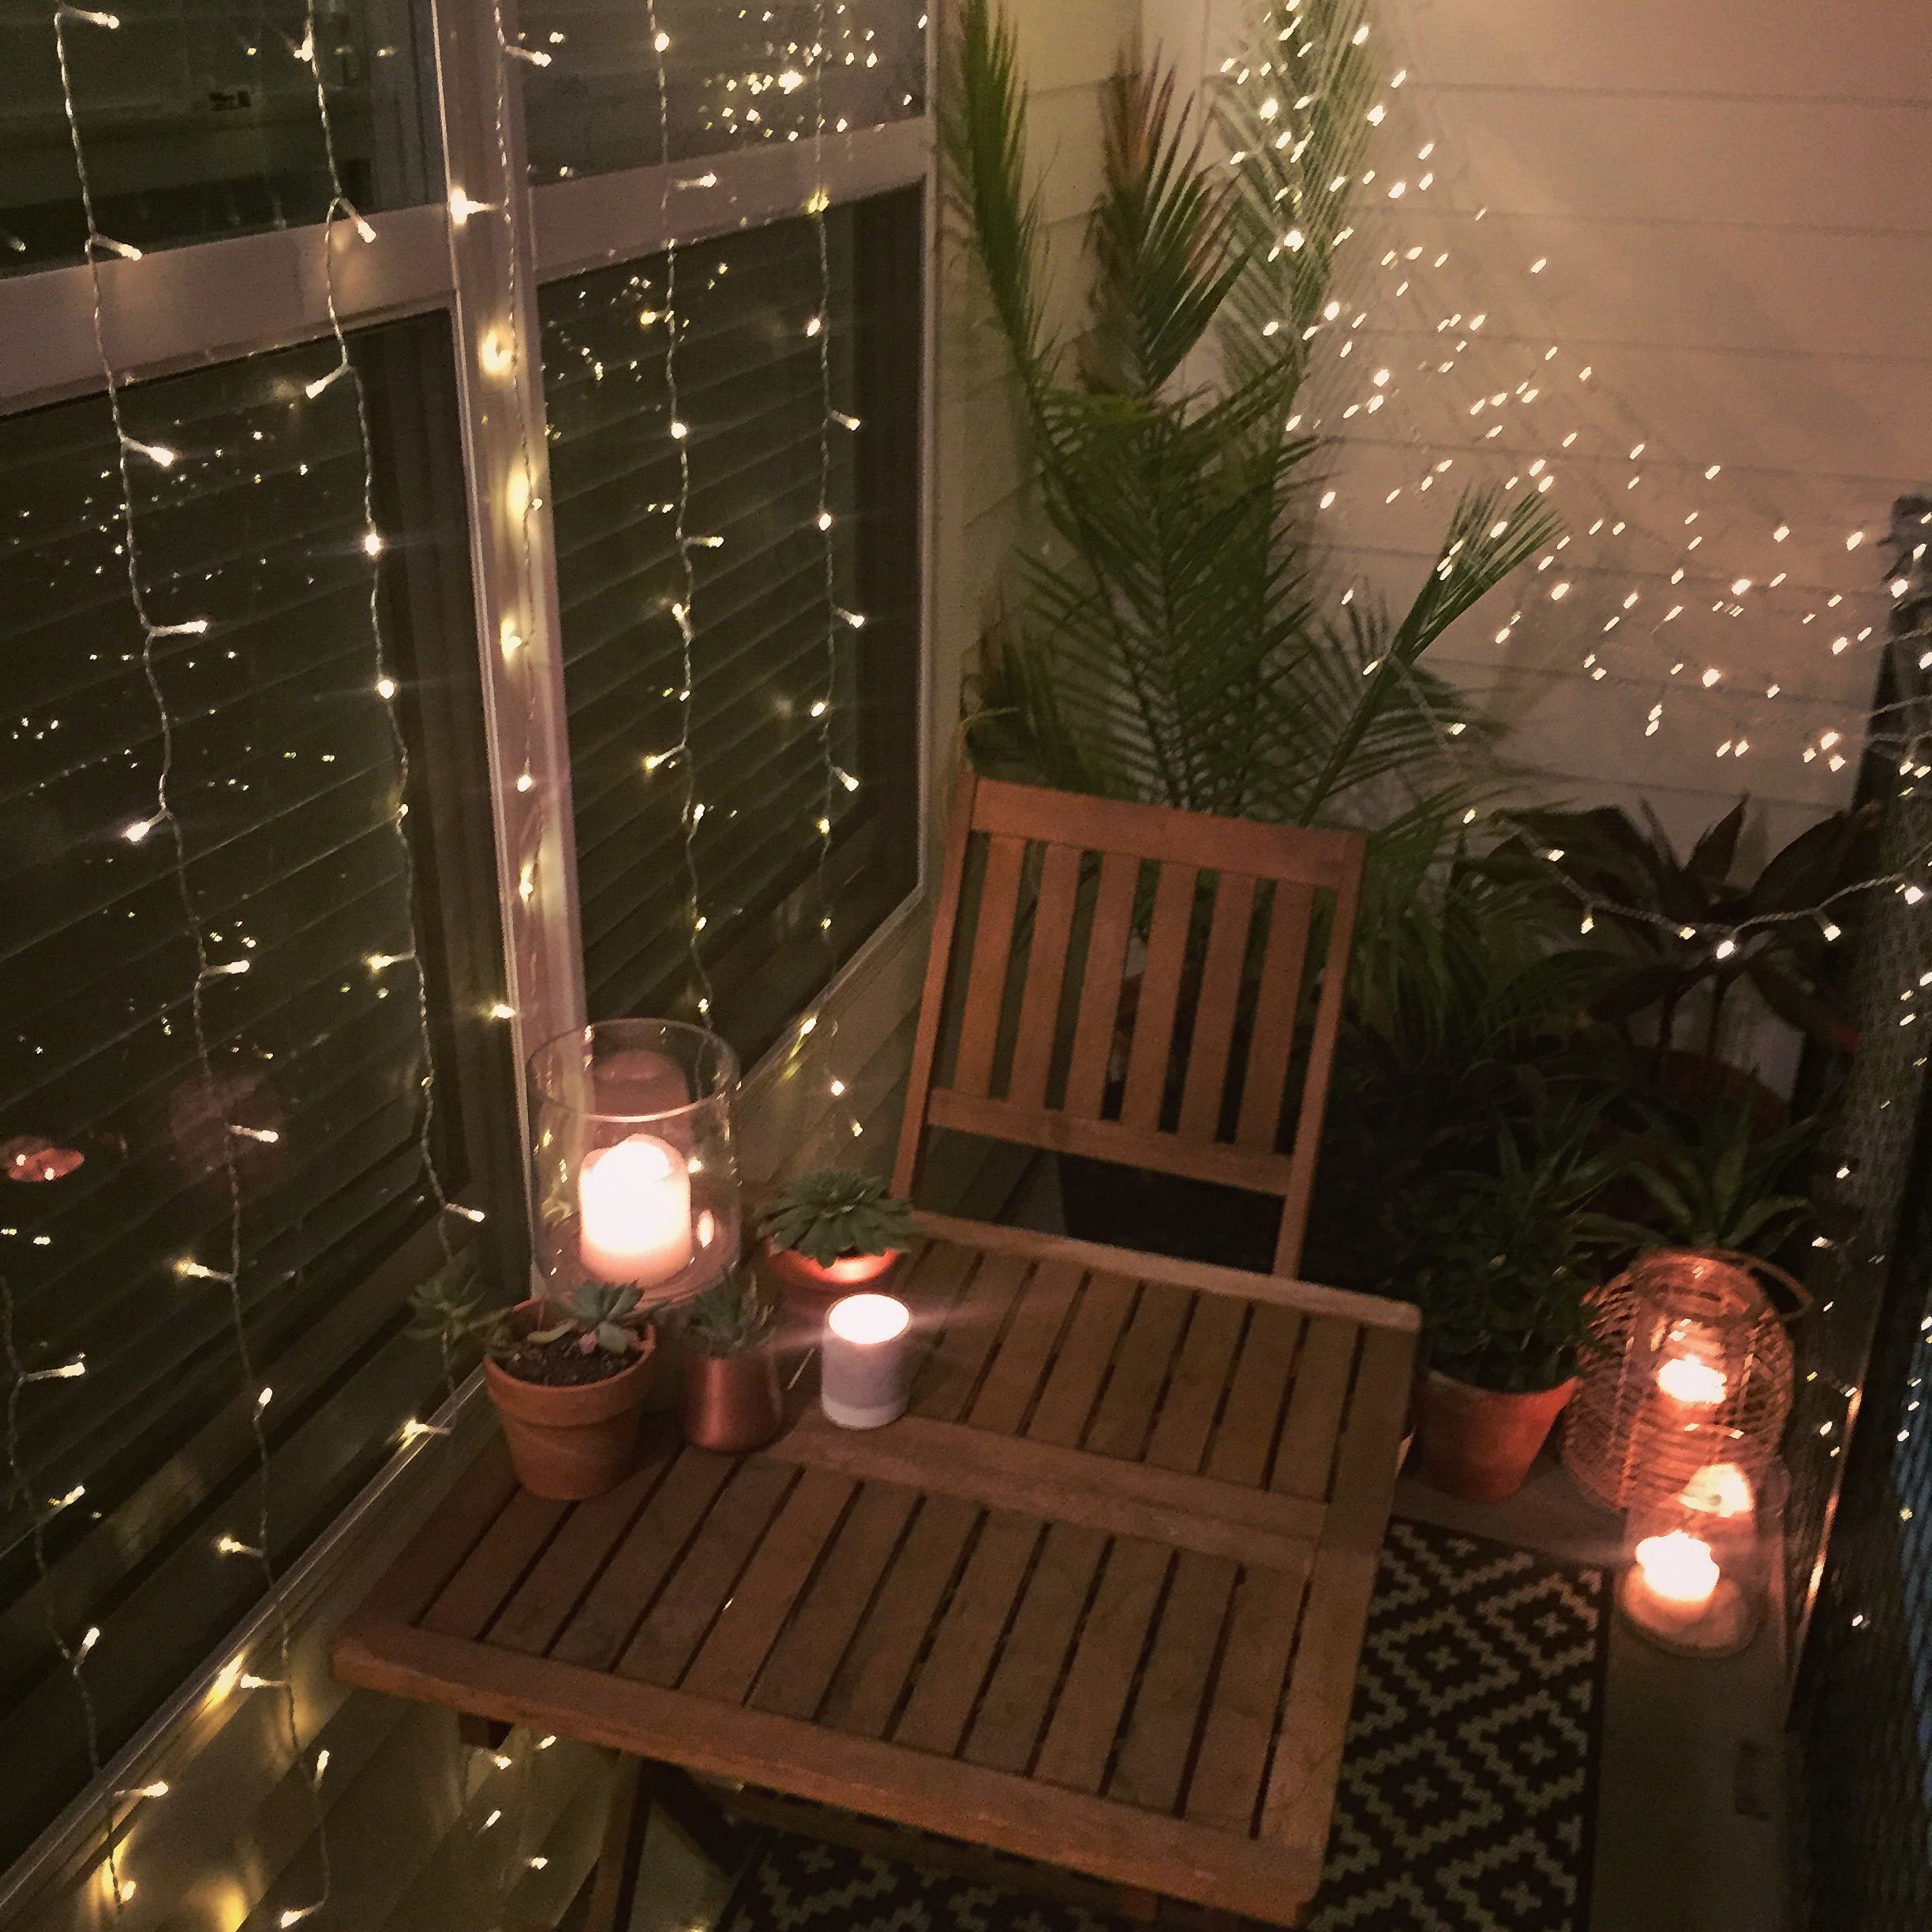 Small balcony decor ideas for an apartment. Hanging string lights ...